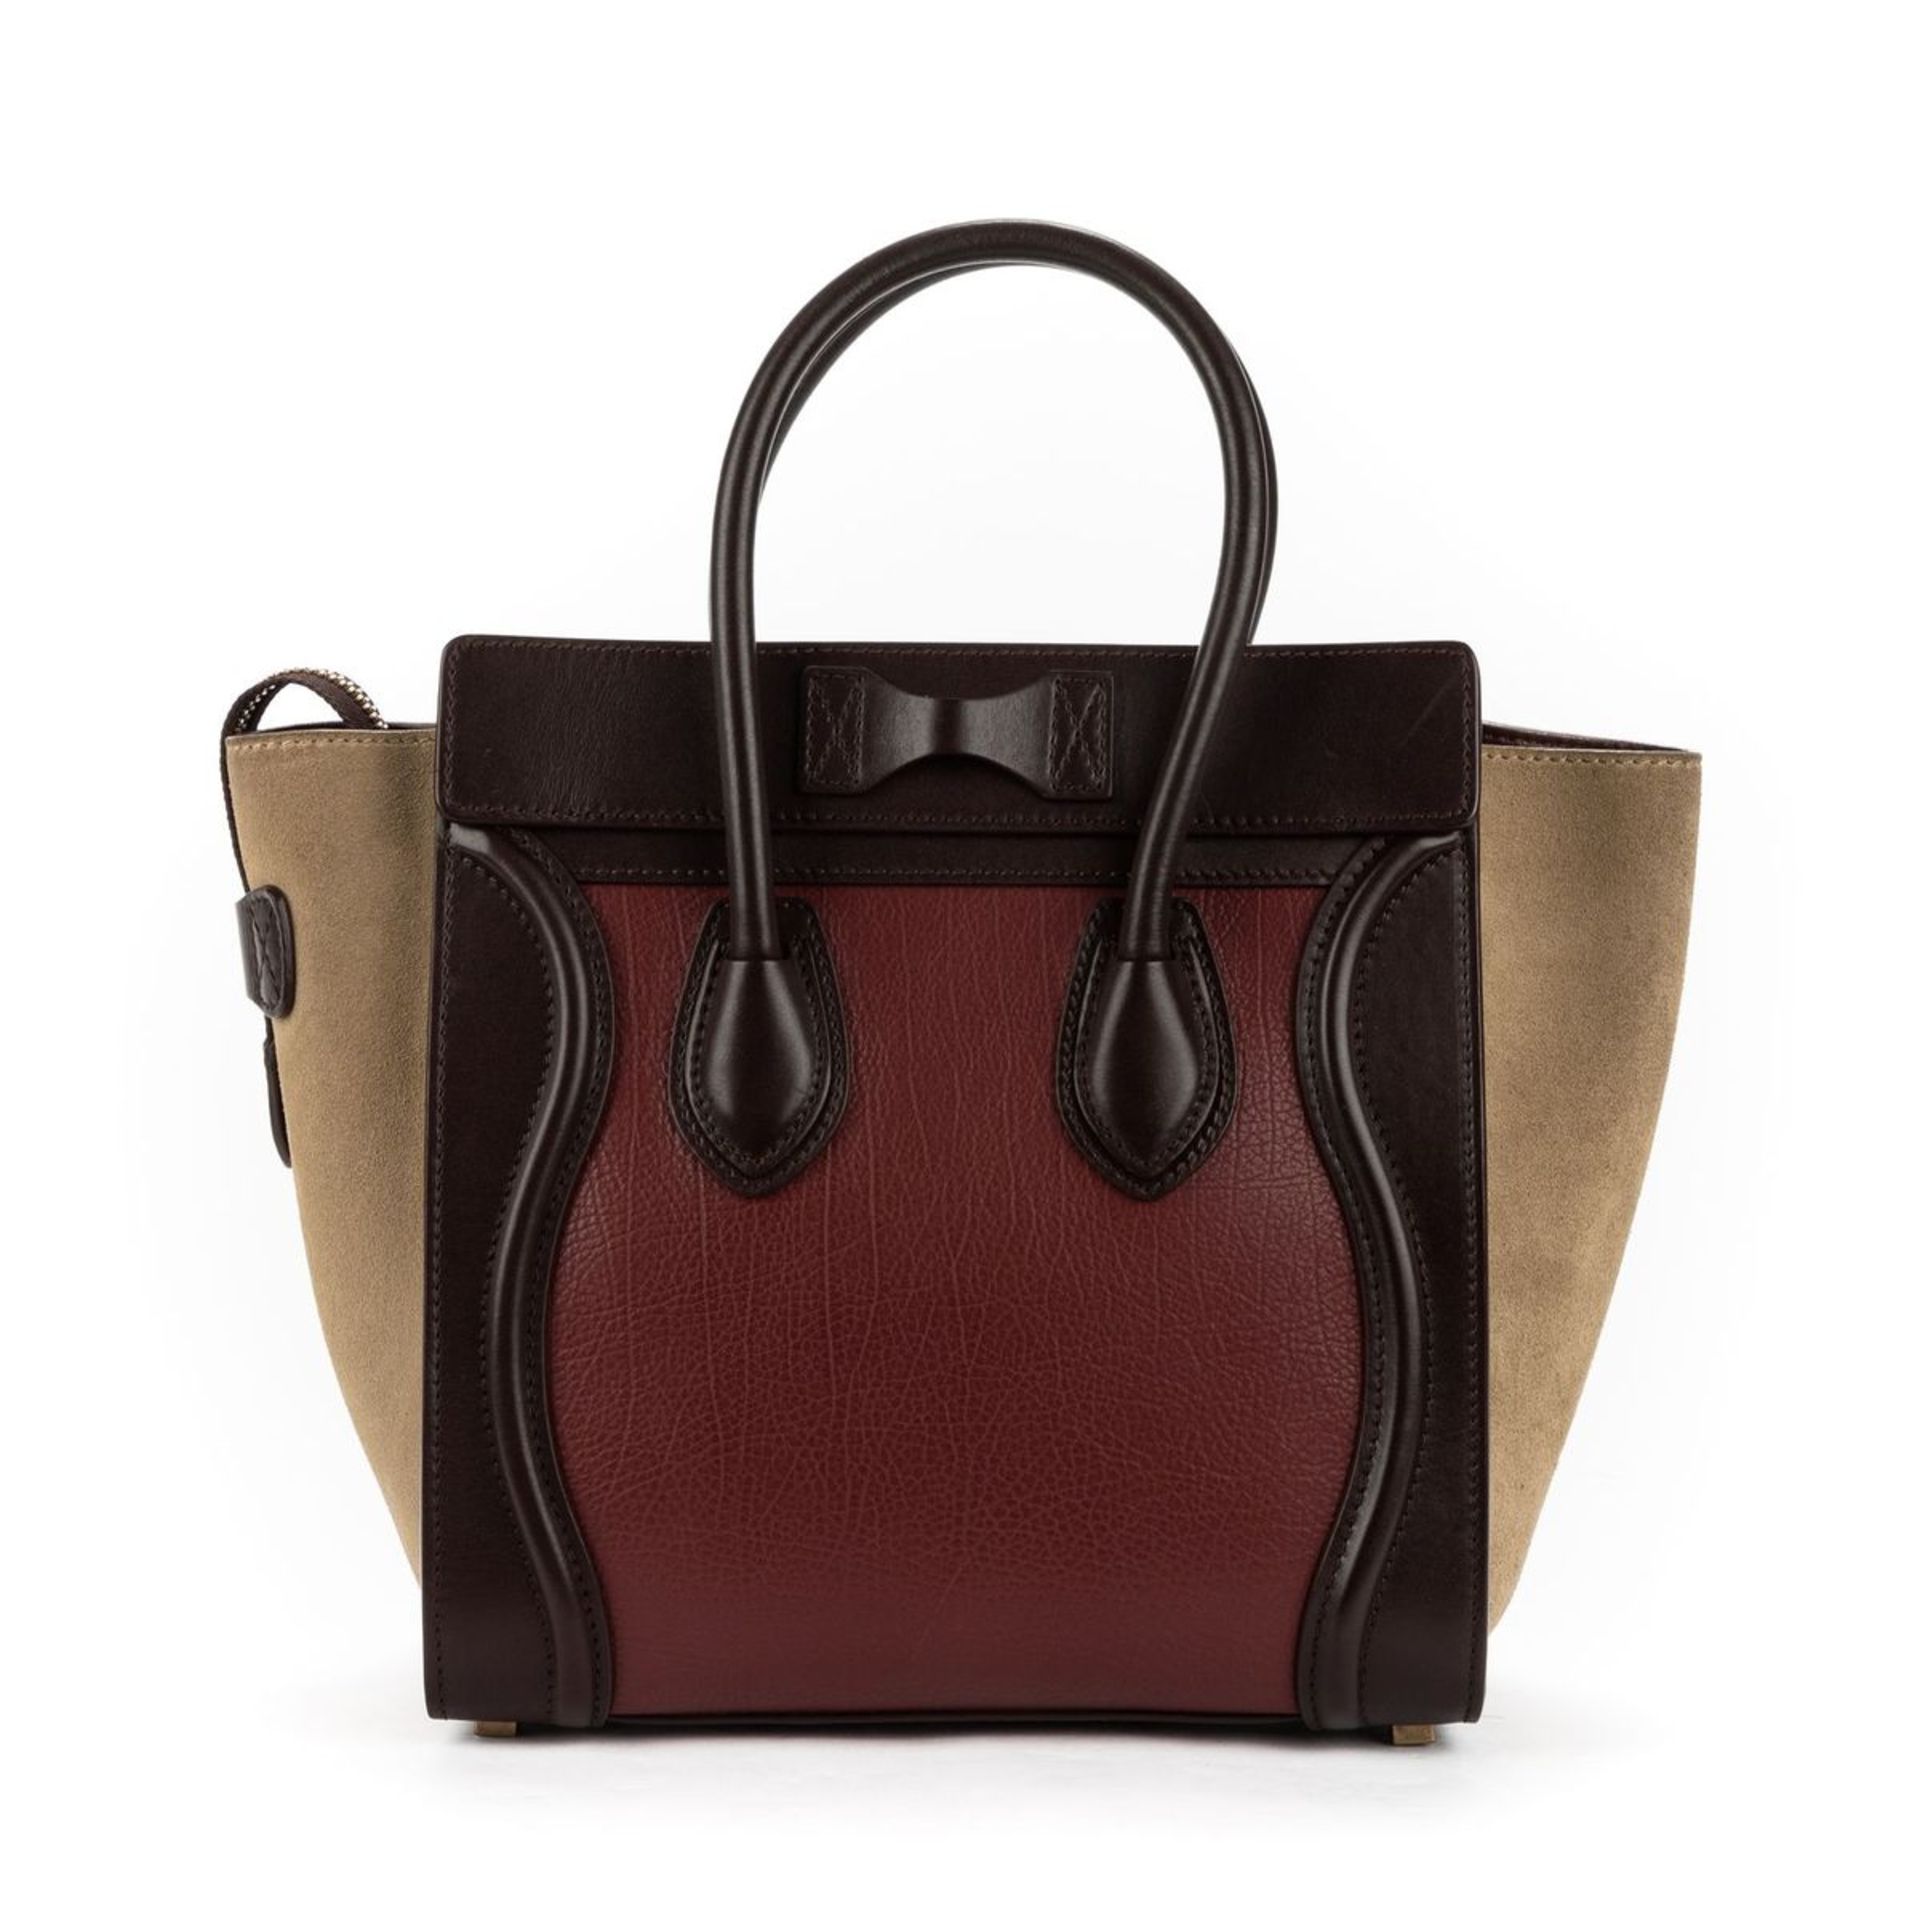 RRP £2500 Celine Luggage Shoulder Bag in Dark Brown - EAG3145 - Grade A Please Contact Us Directly - Image 3 of 3